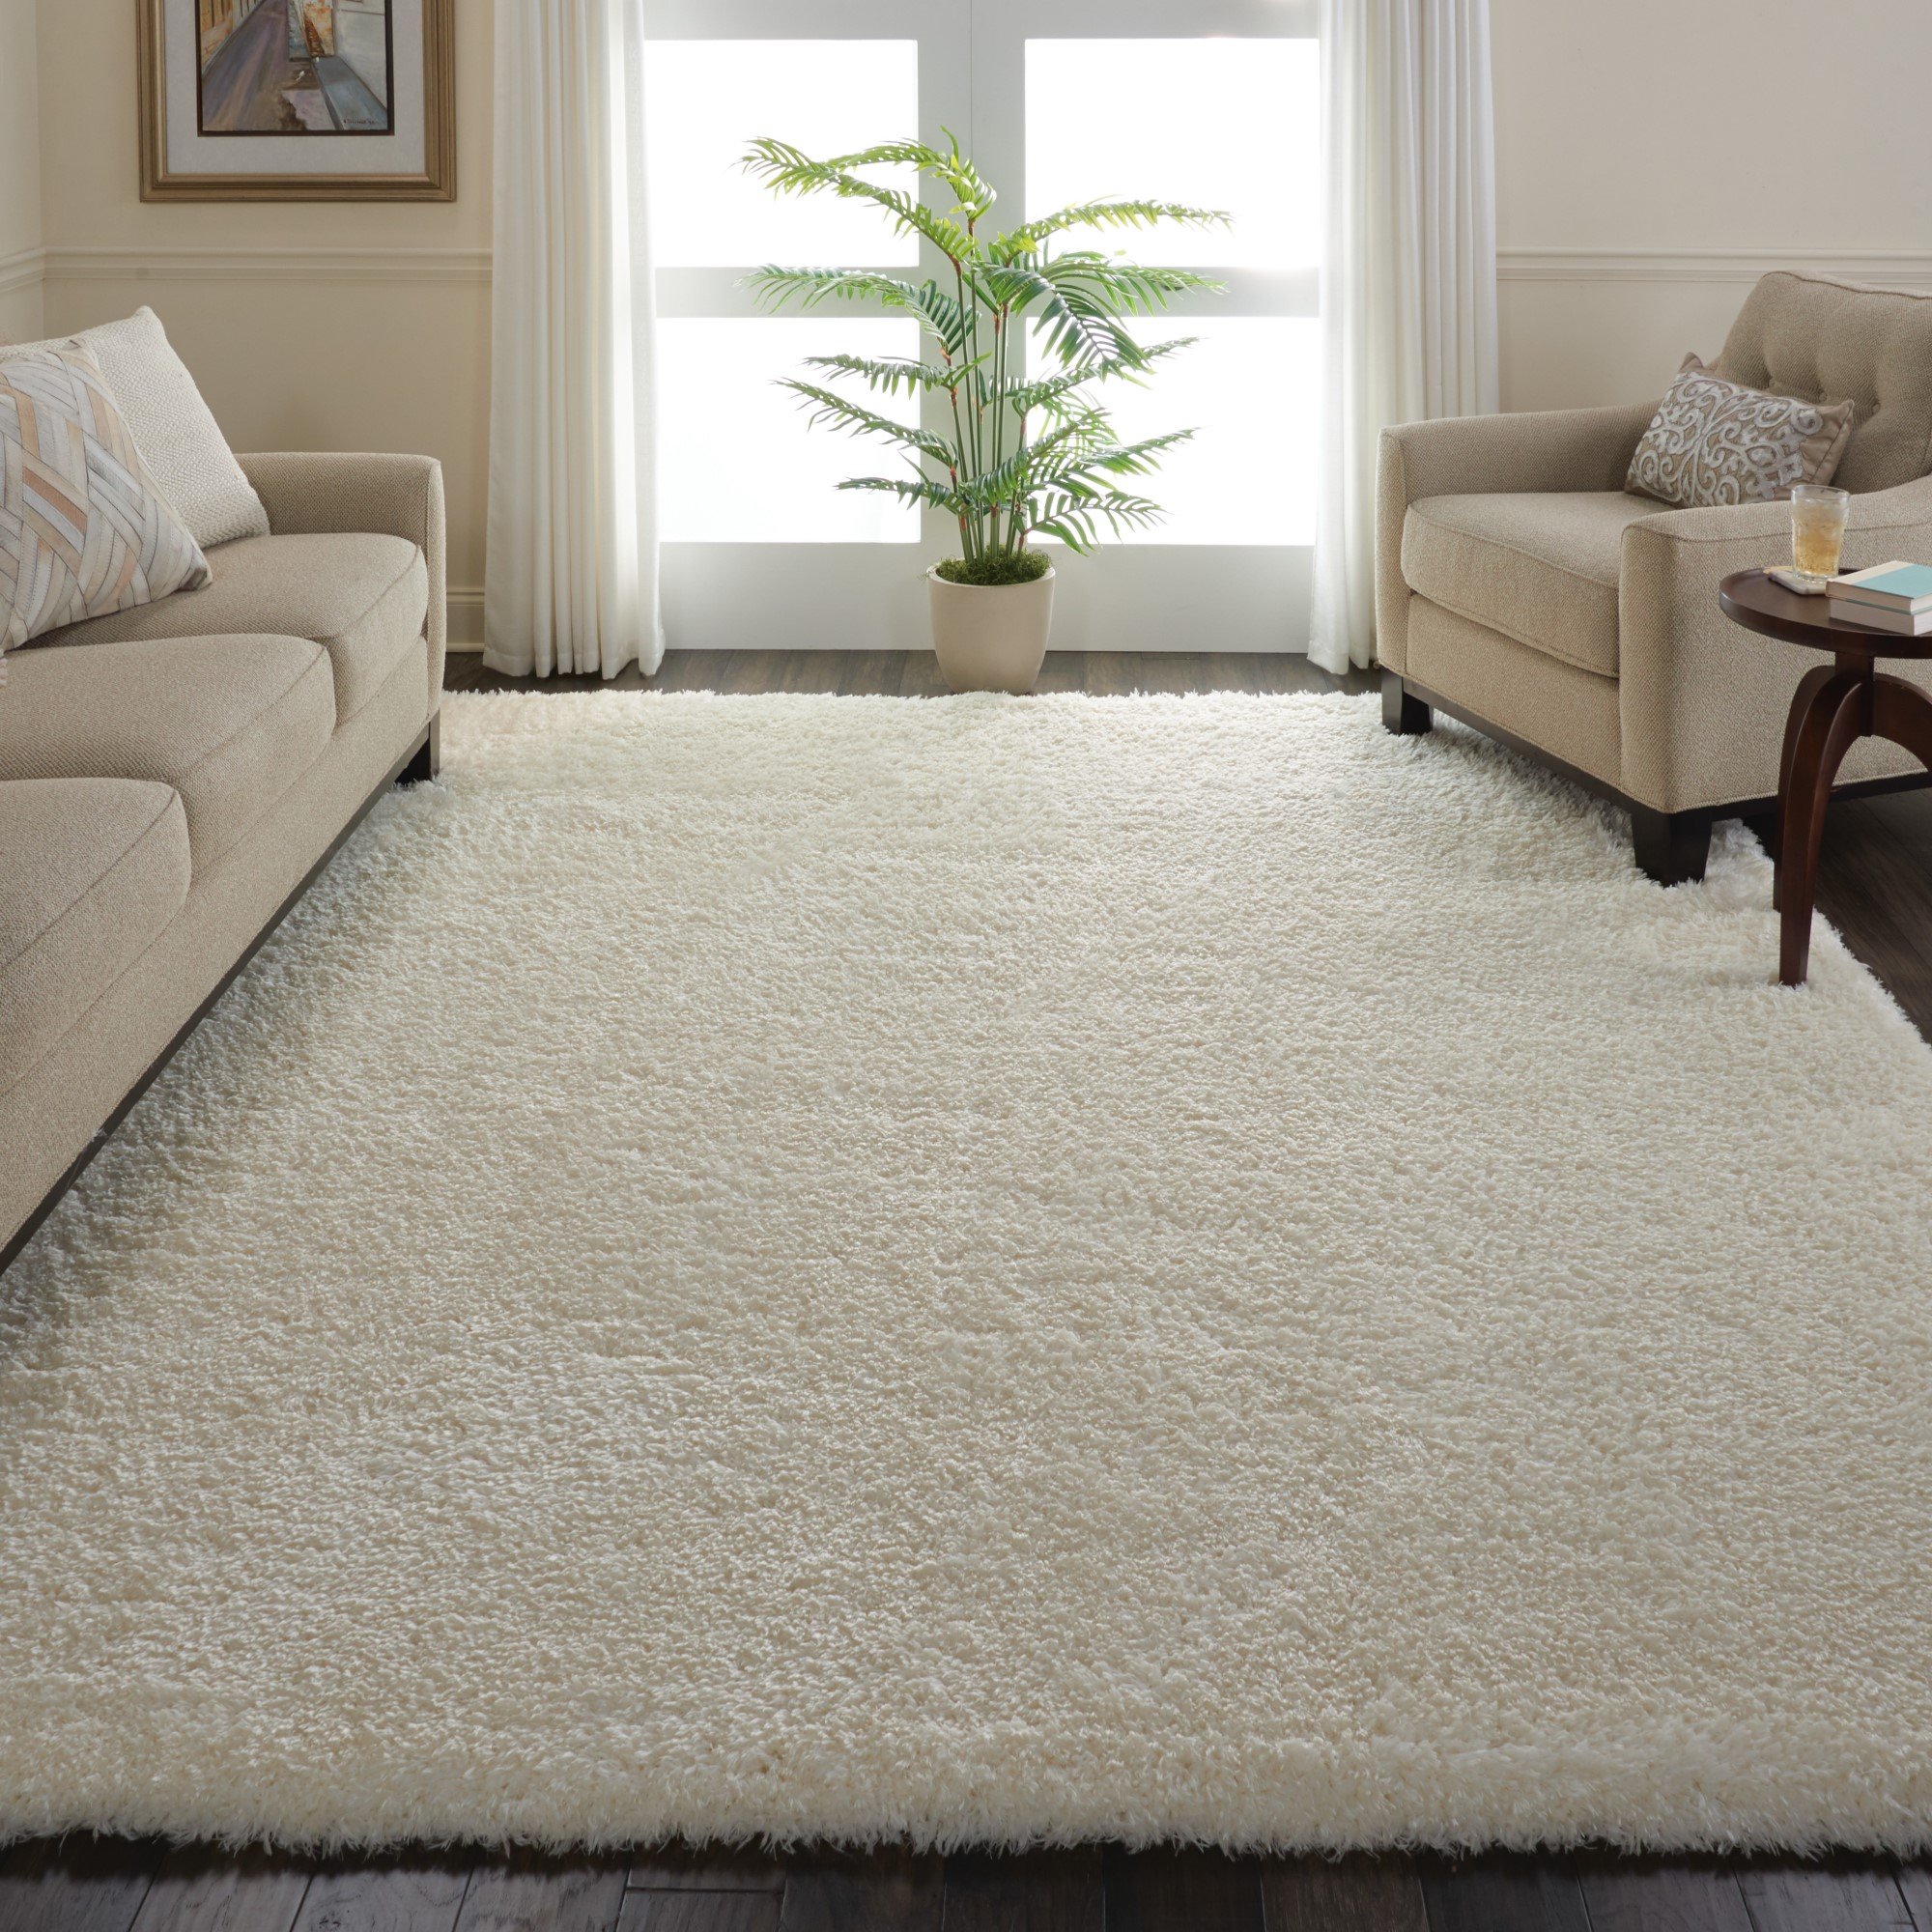 NEW FACTORY DIRECT LUXURIOUS SHAGGY CARPET RUG Super Thick & Soft Floor Rug BIG! 